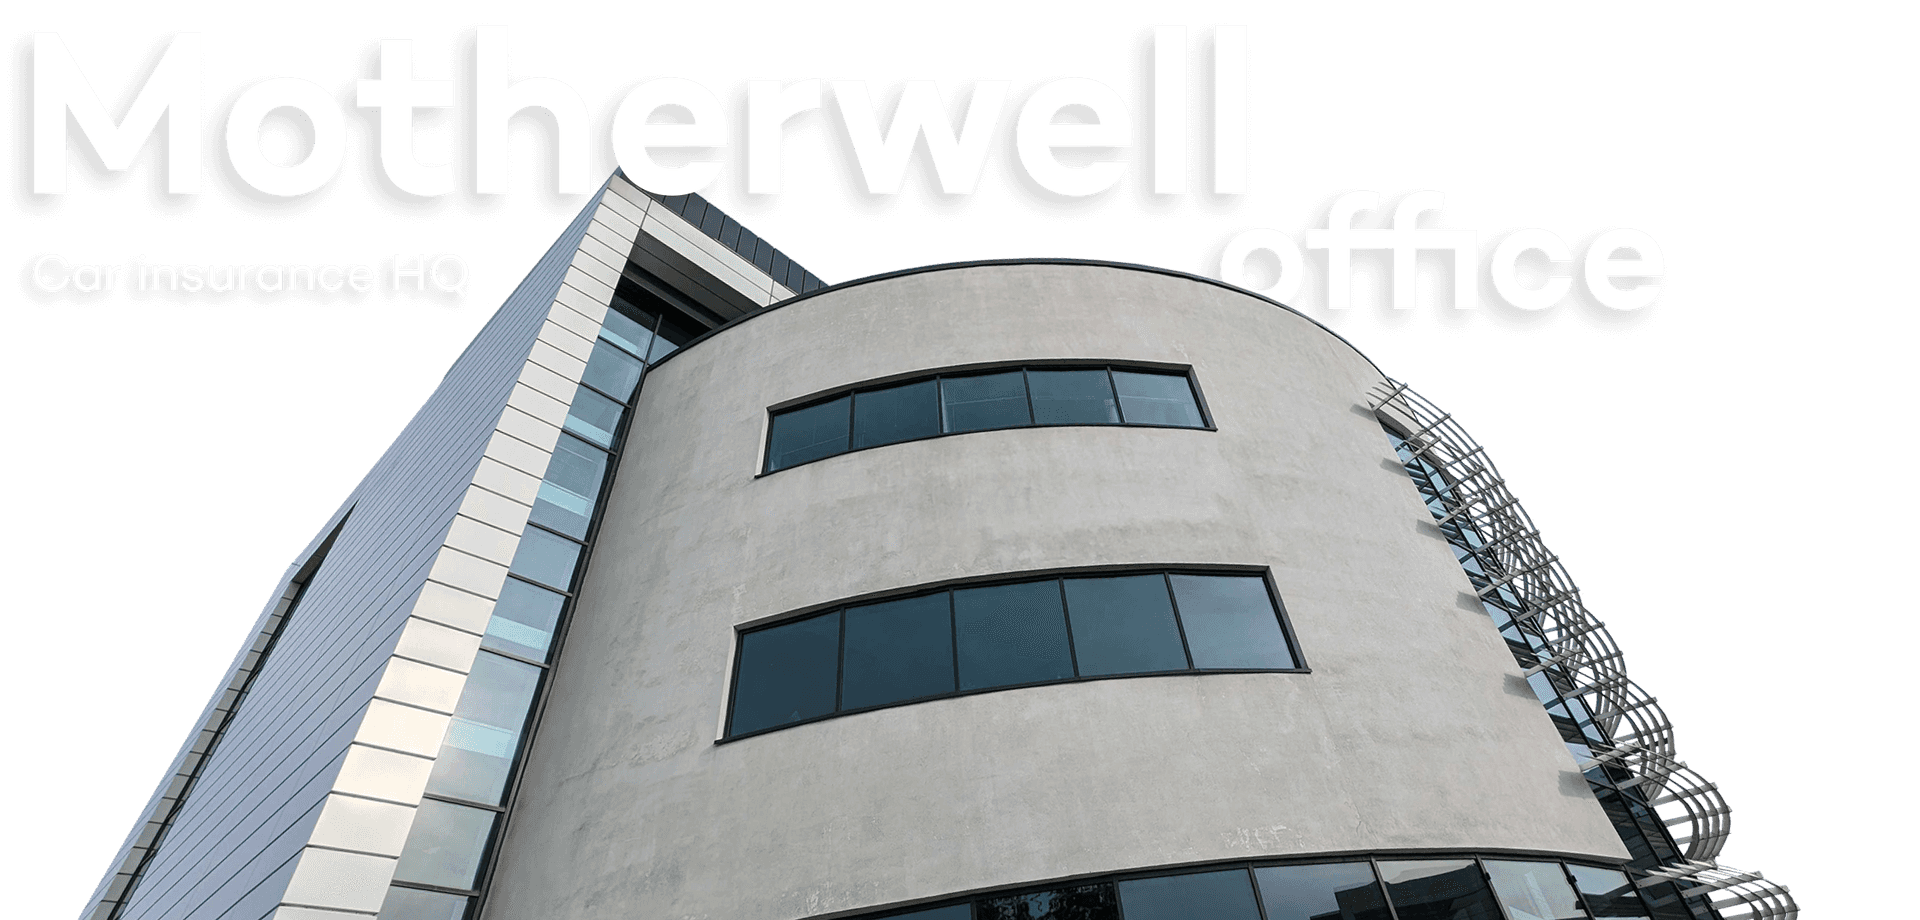 Motherwell office. Car insurance HQ